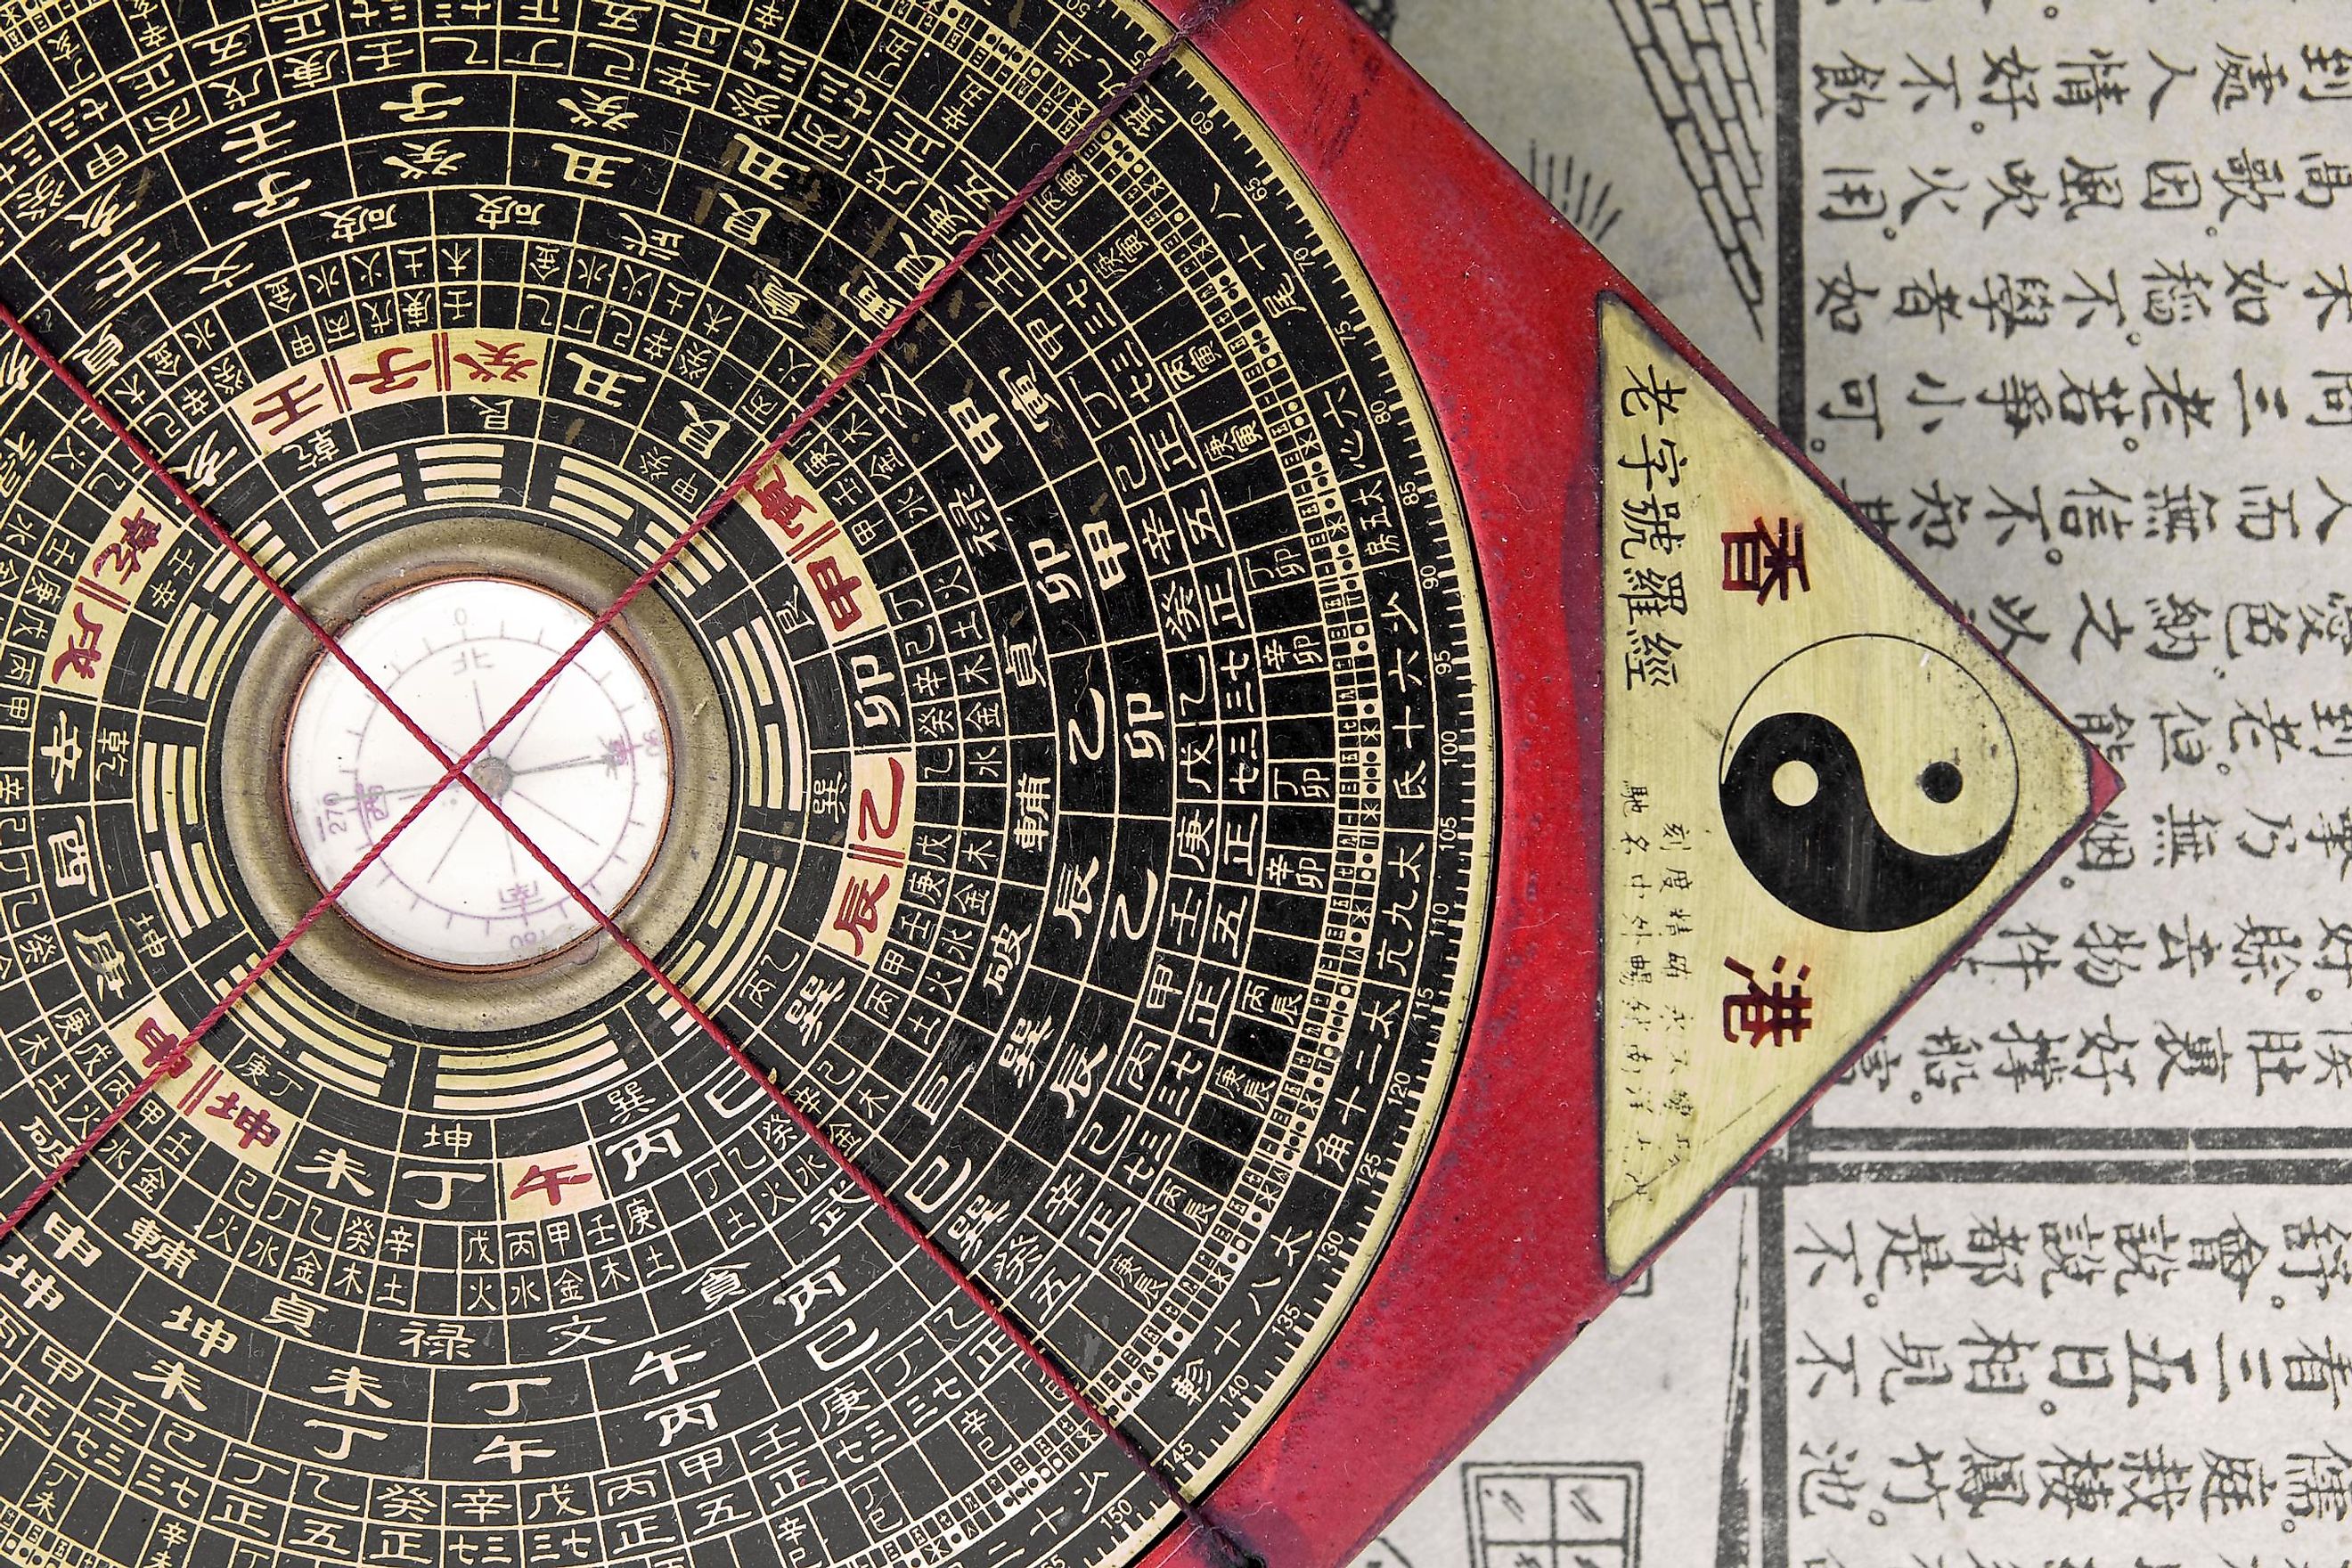 The ancient Chinese invented paper, compass, and many more important items.